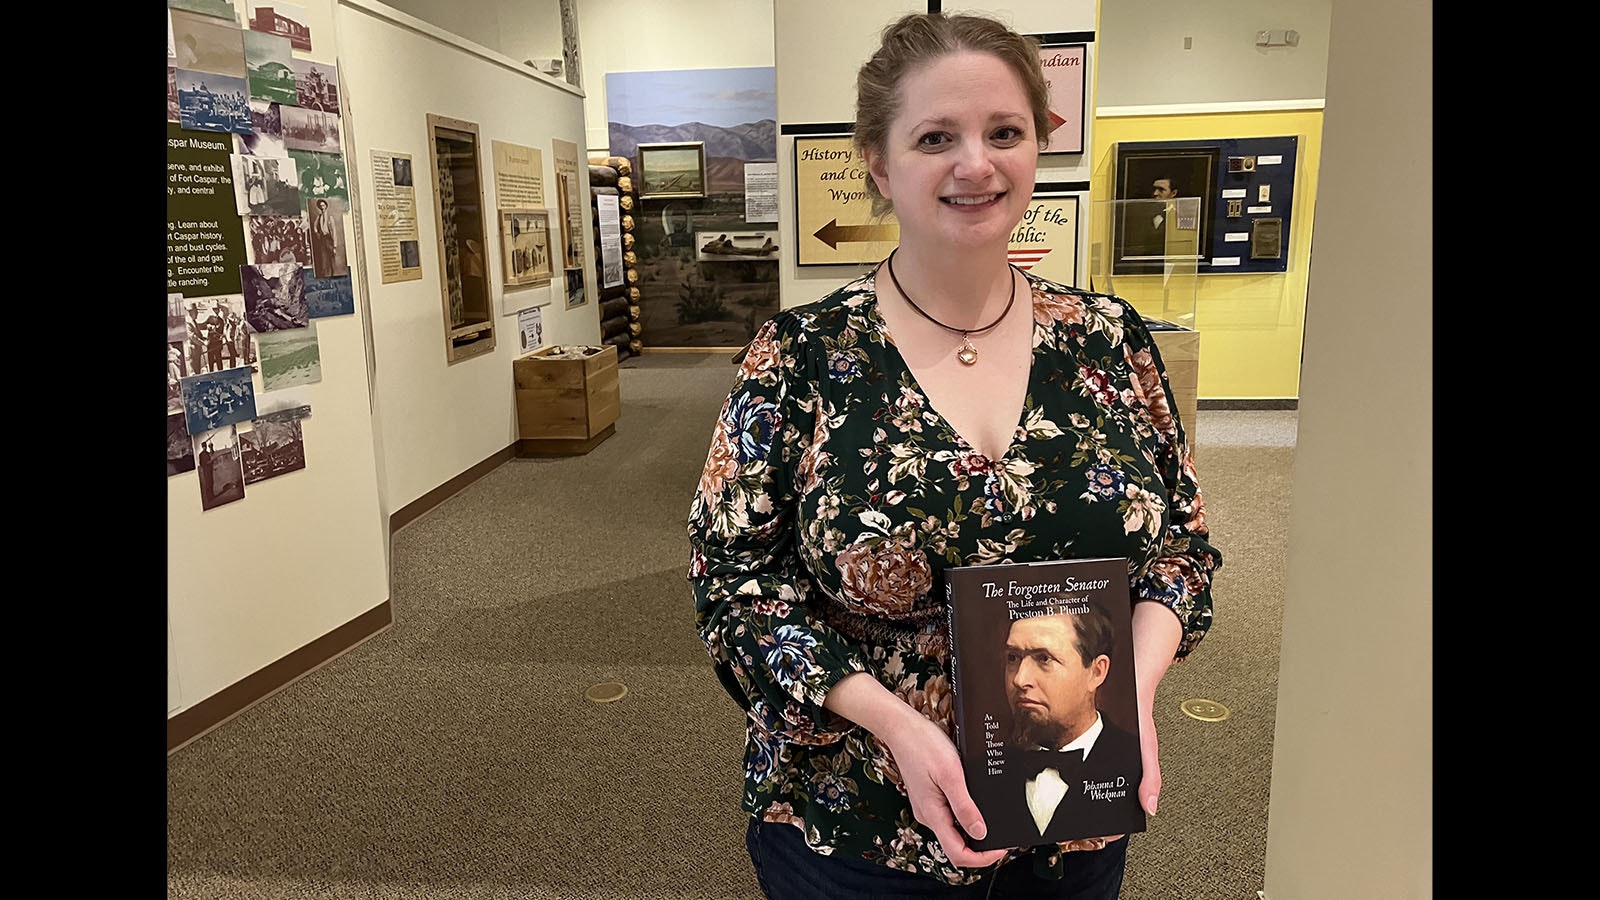 Johanna Wickman wrote a biography of Preston Plumb, who she characterizes as key player in America’s history but is now forgotten.